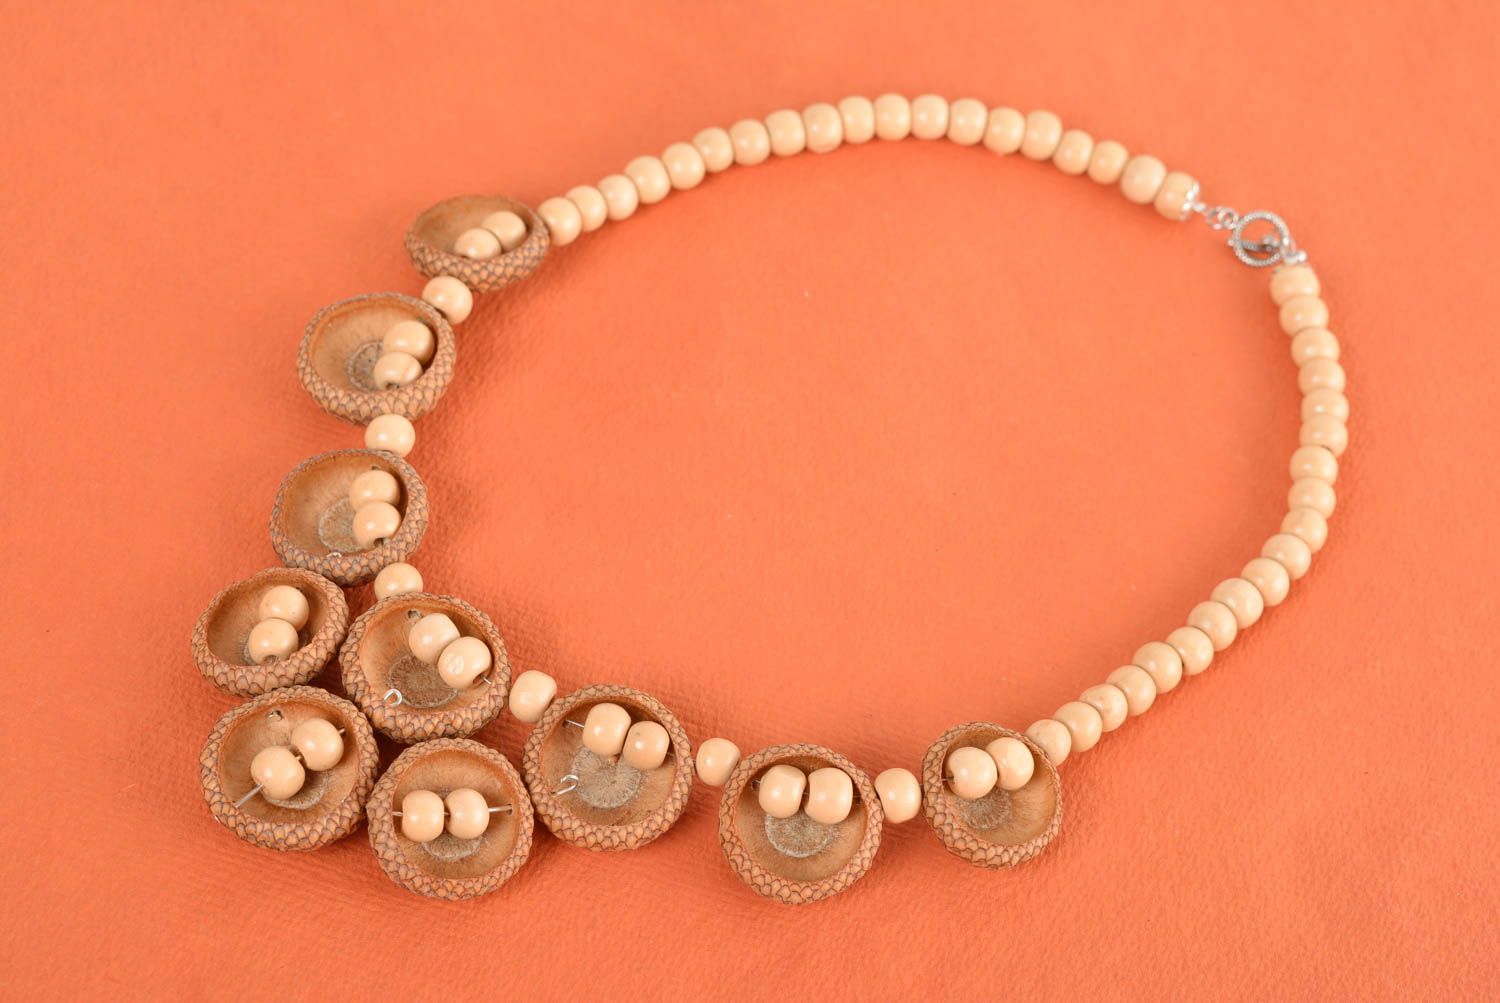 Necklace with wooden beads and acorns handmade designer accessory in eco-style photo 1